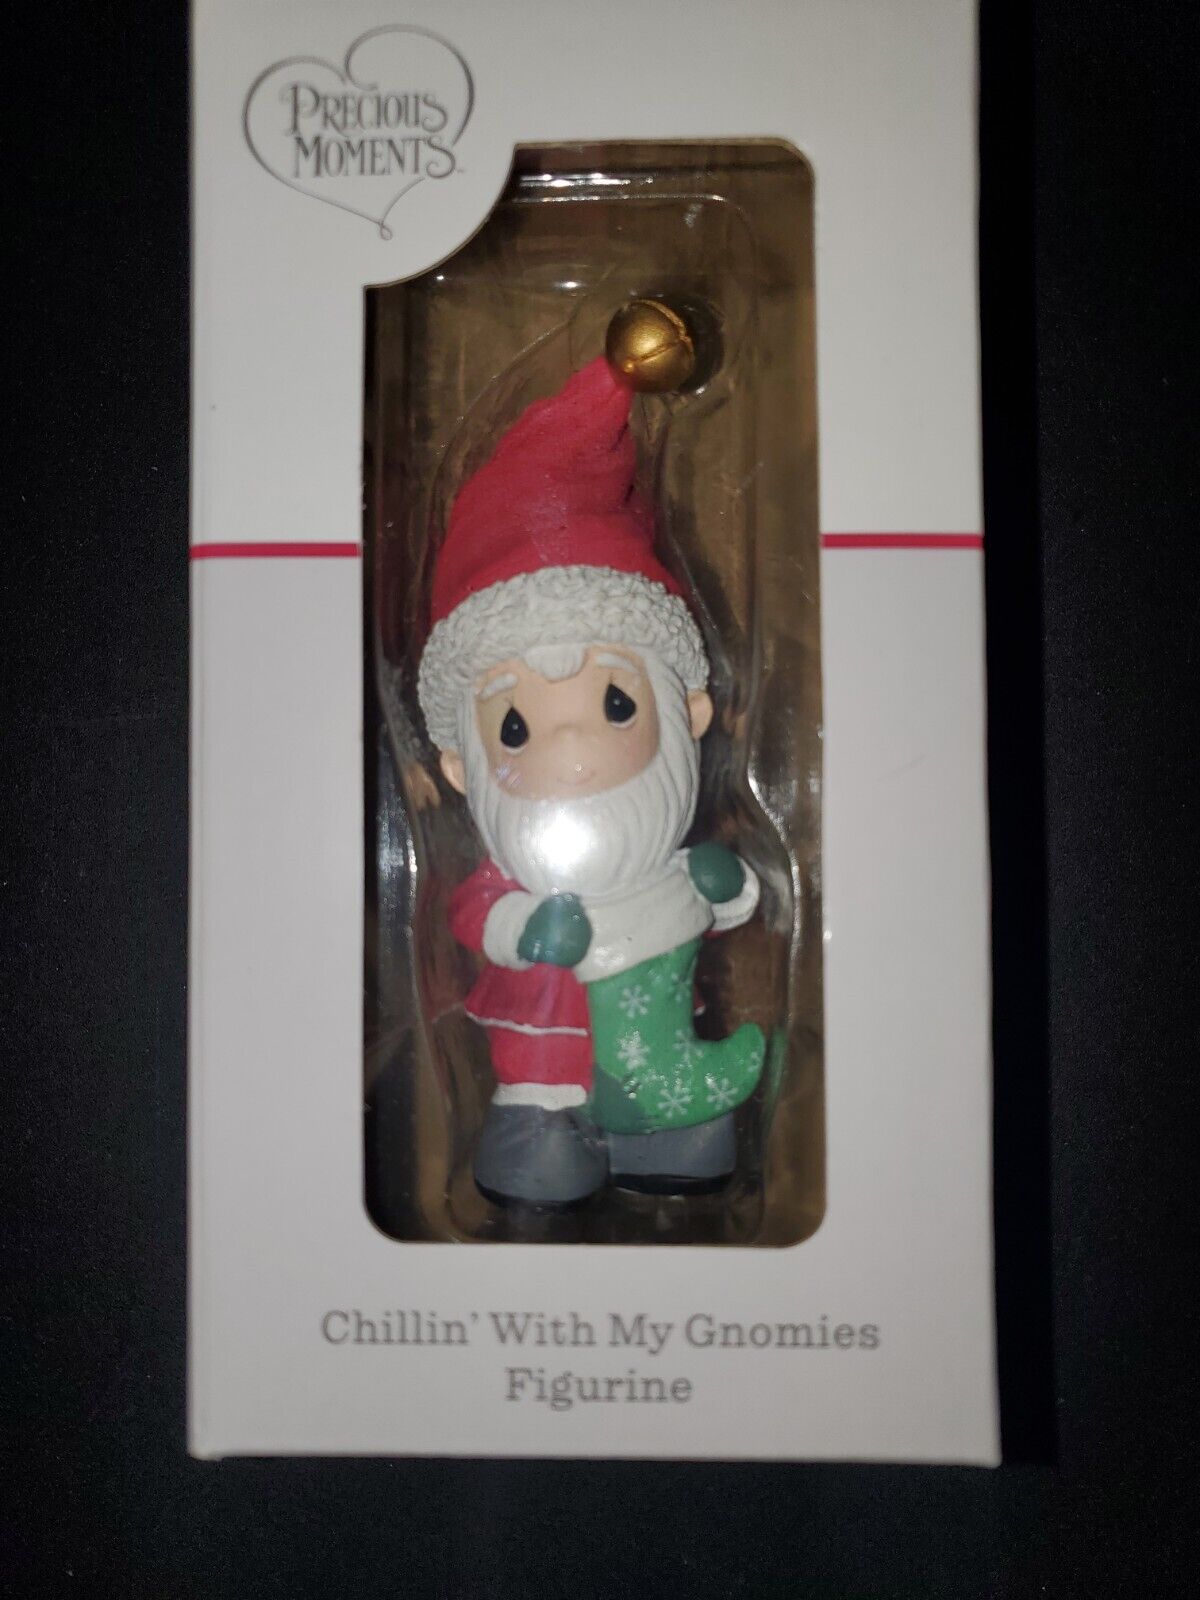 PRECIOUS MOMENTS Christmas Chillen With My Gnomies Figurine New